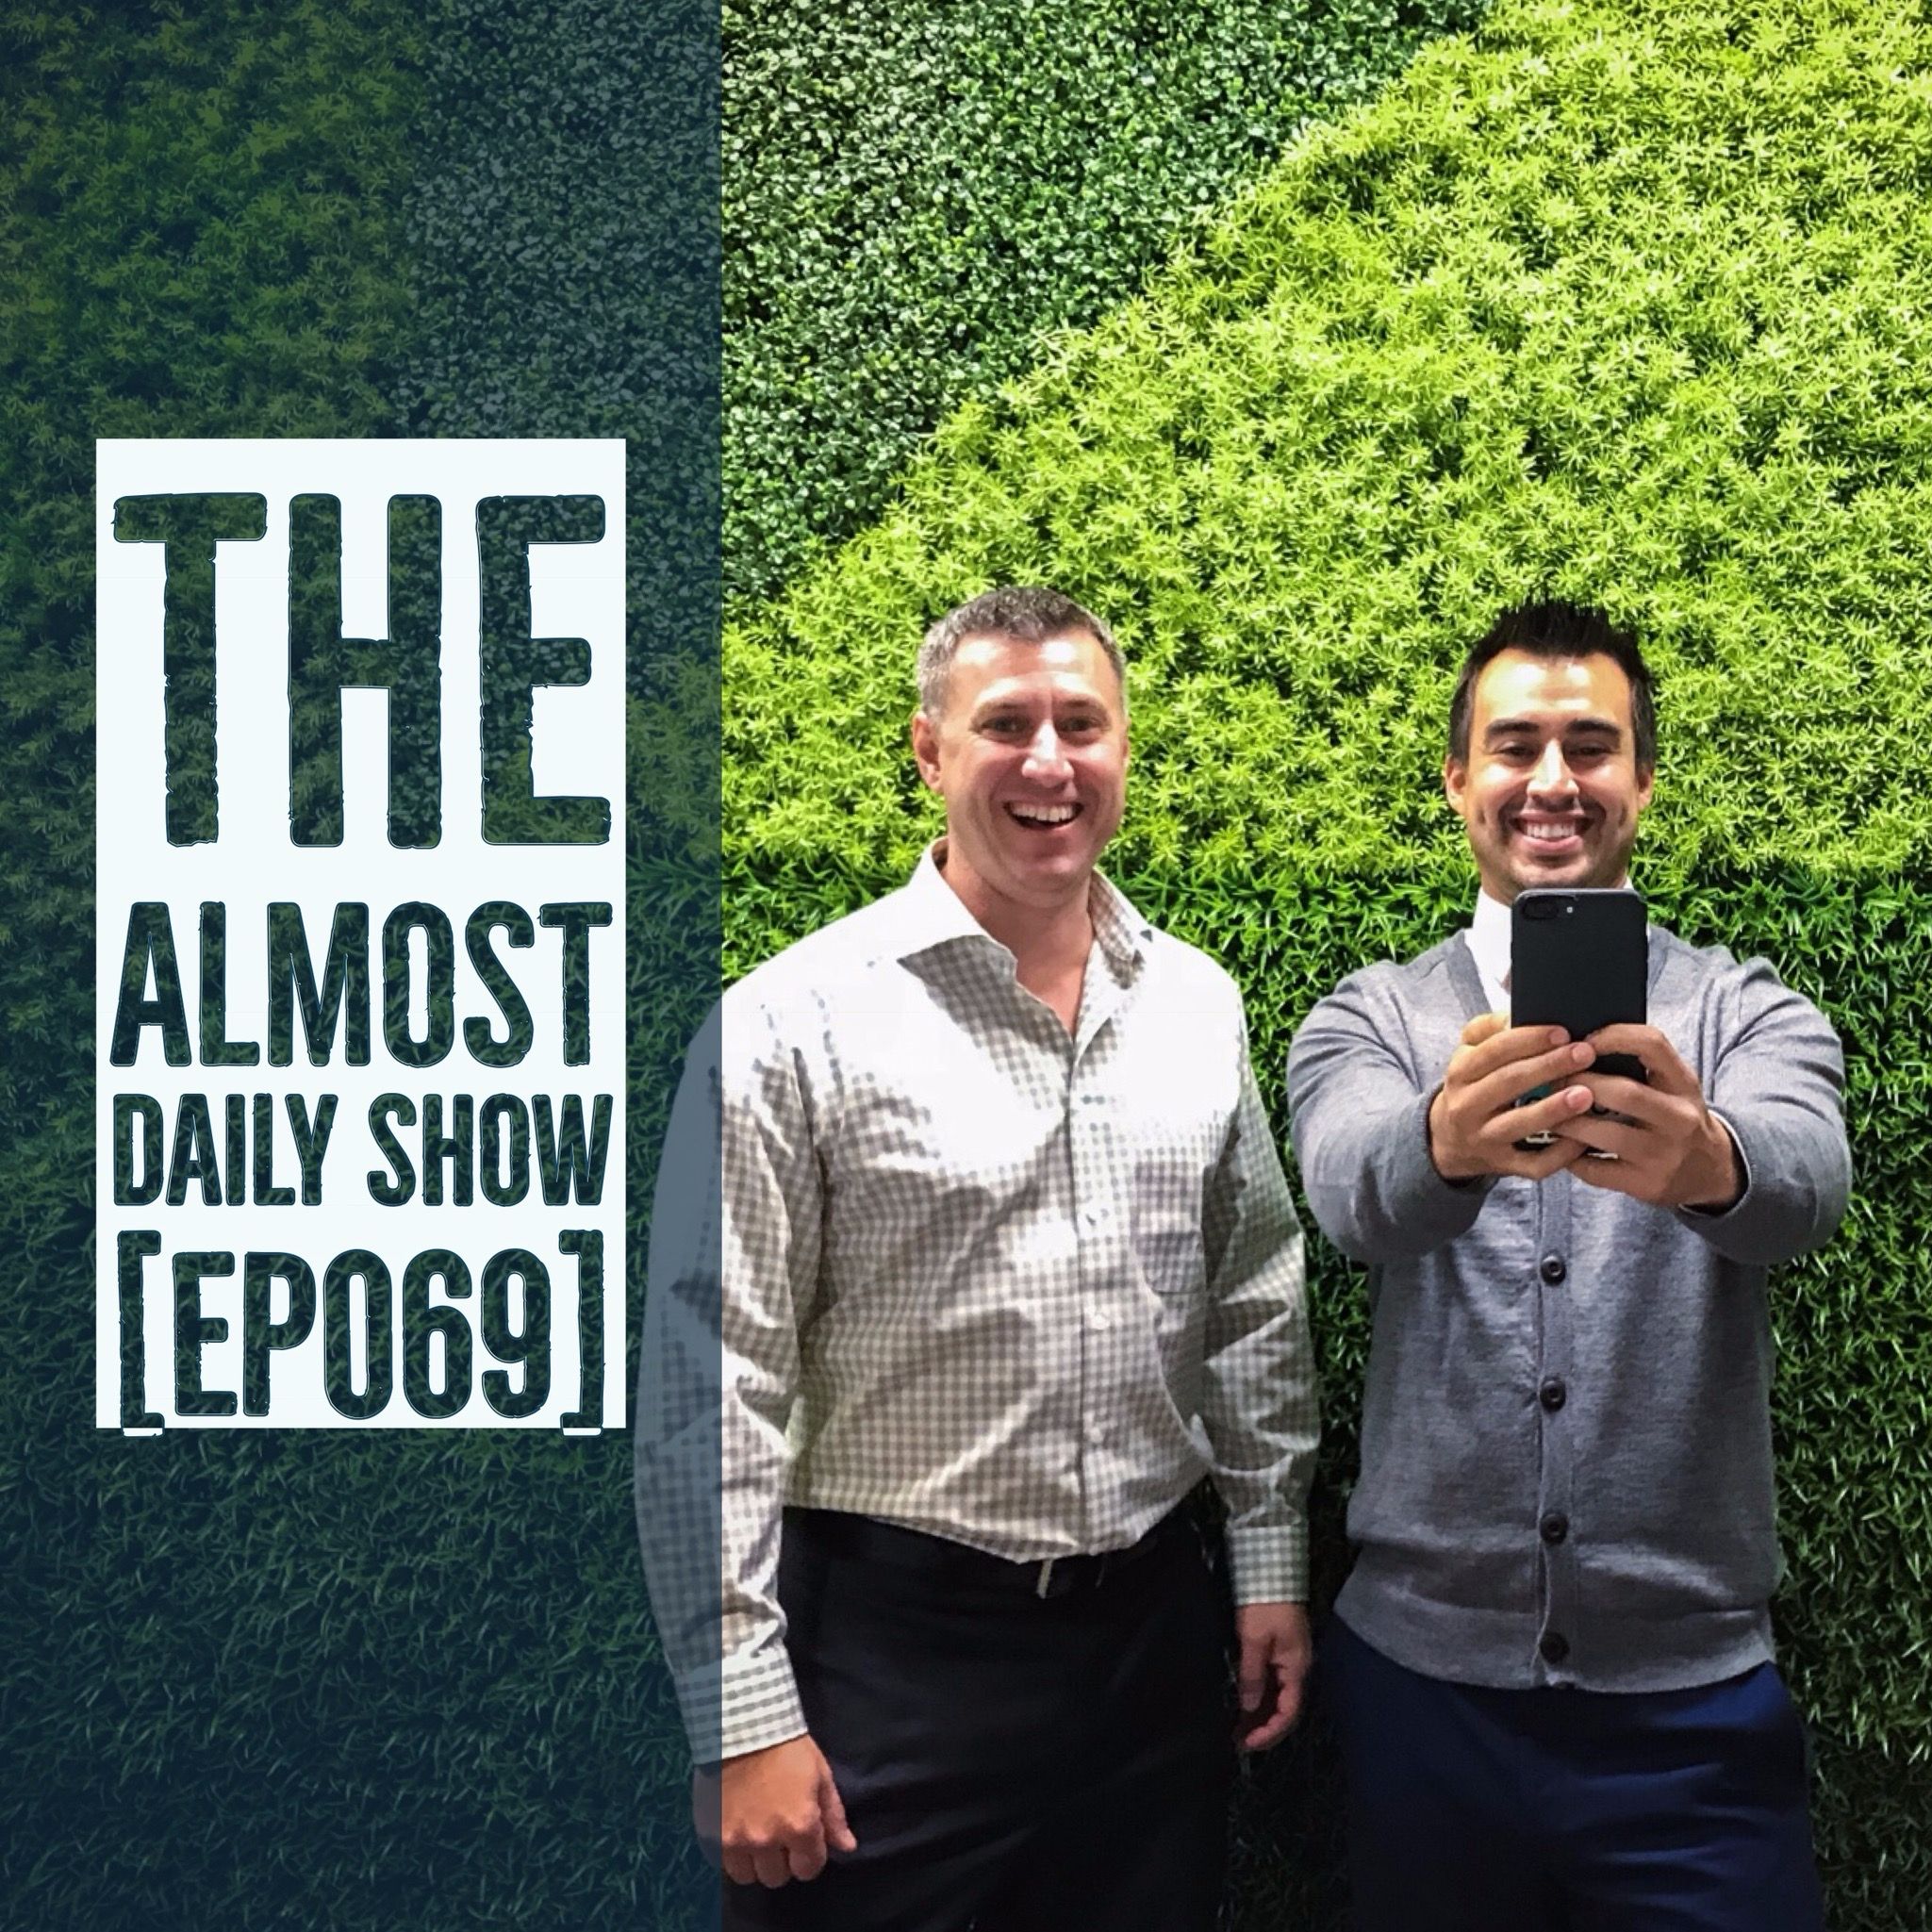 The Best Way to Onboard New Clients | Almost Daily Show Ep 069